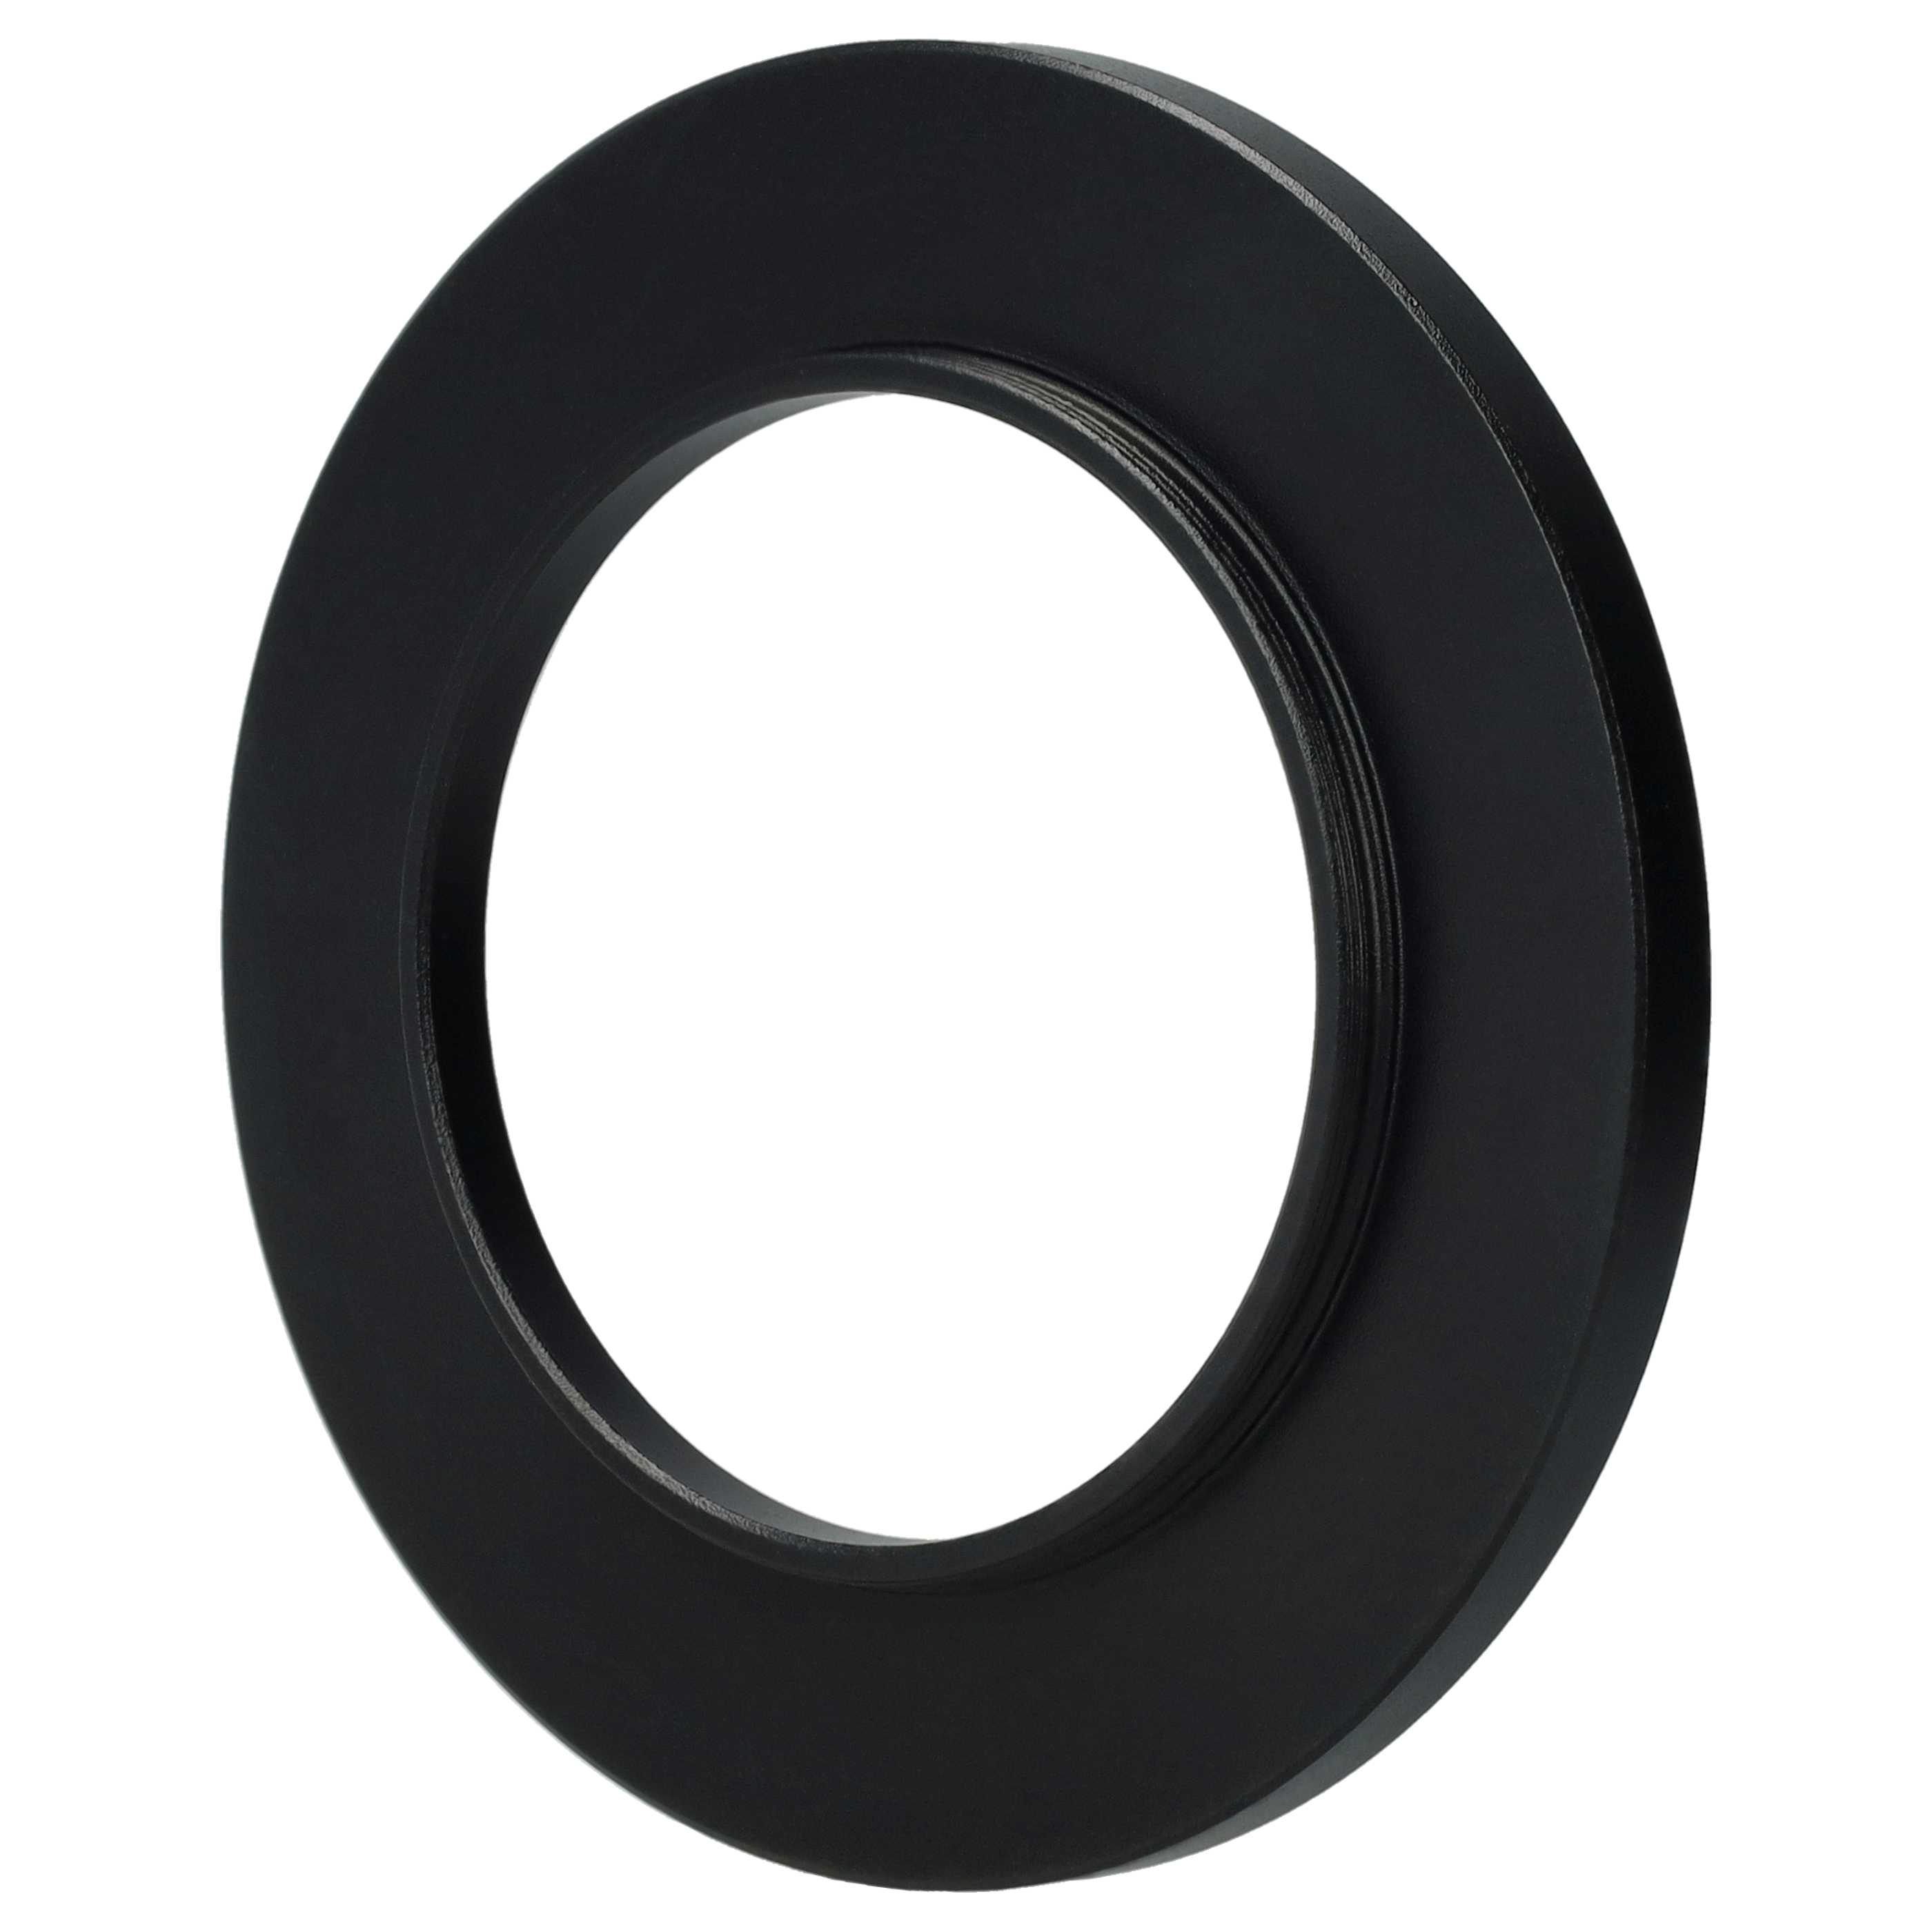 Step-Up Ring Adapter of 40.5 mm to 58 mmfor various Camera Lens - Filter Adapter